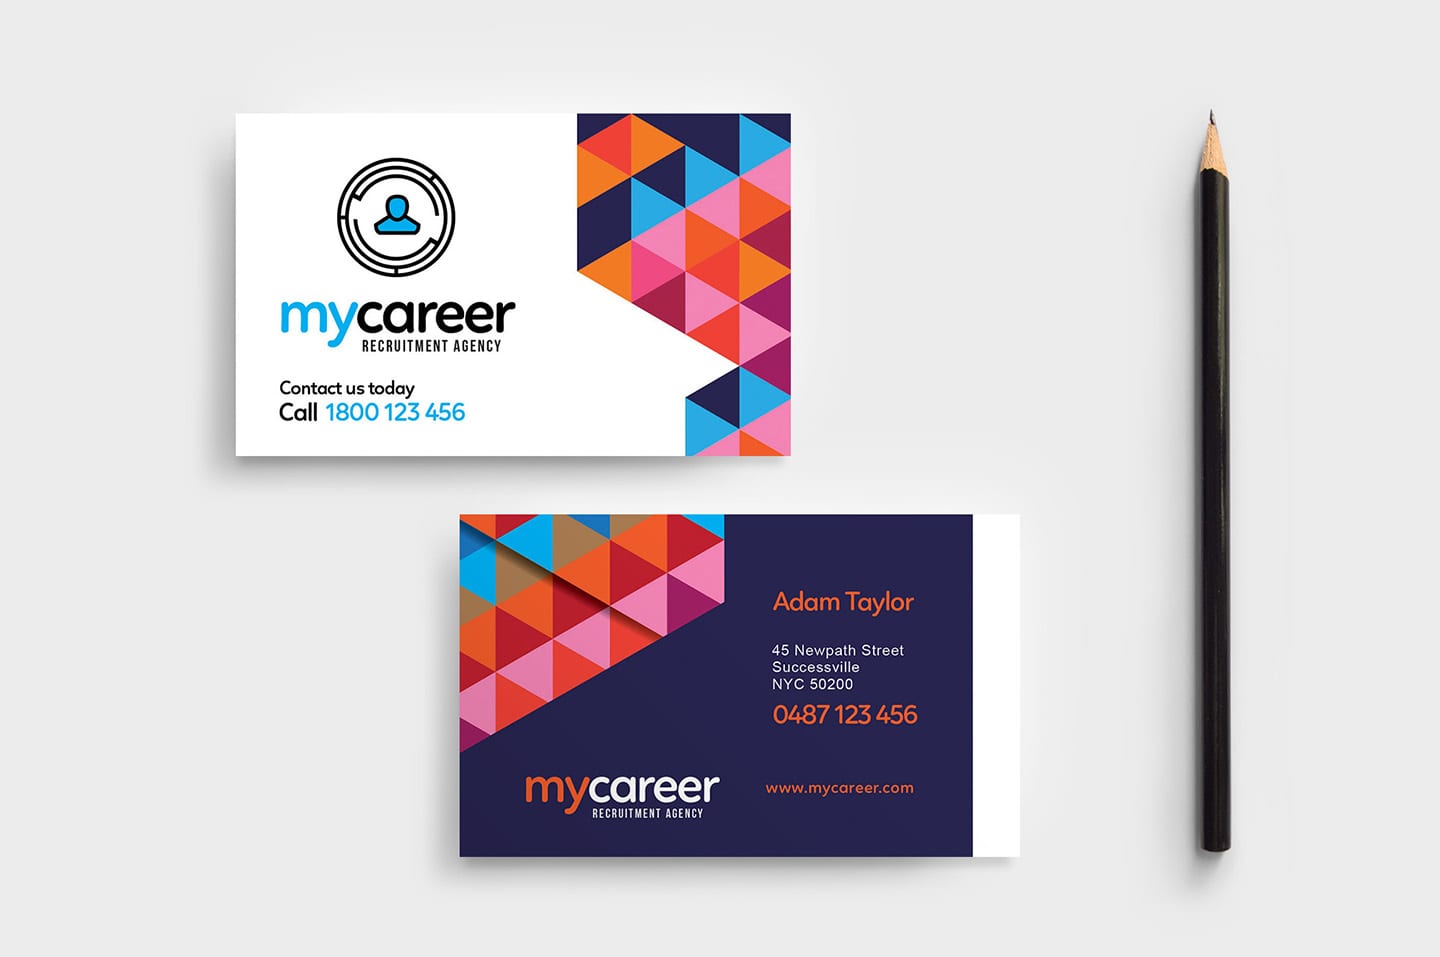 Recruitment Agency Business Card Template in PSD, Ai & Vector Inside Business Card Size Photoshop Template